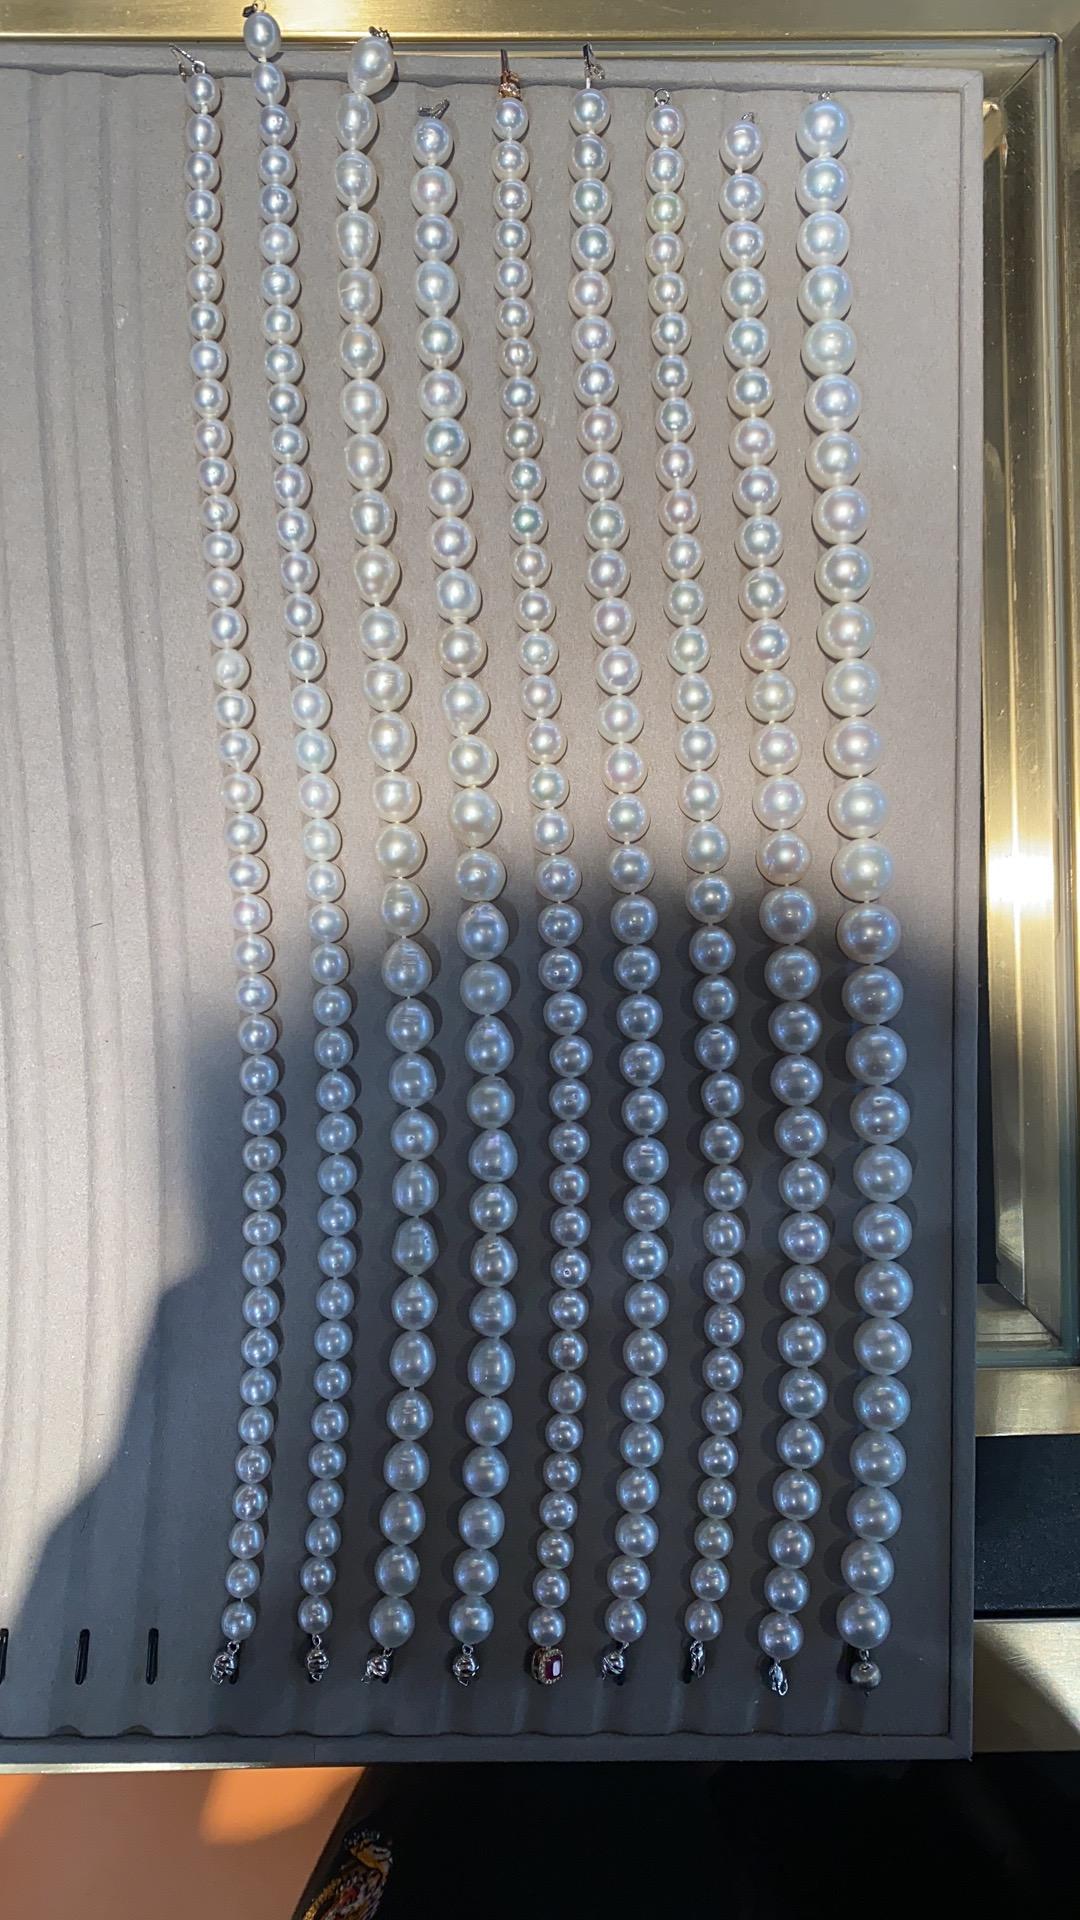 listing for strand NO.1


A strand of Cultured Australian South Sea pearls
Pearls are drilled and temporarily strung on wire for transportation purposes.

GUARANTEED NATURAL COLOUR AND LUSTRE

These pearls display their natural colour and lustre and